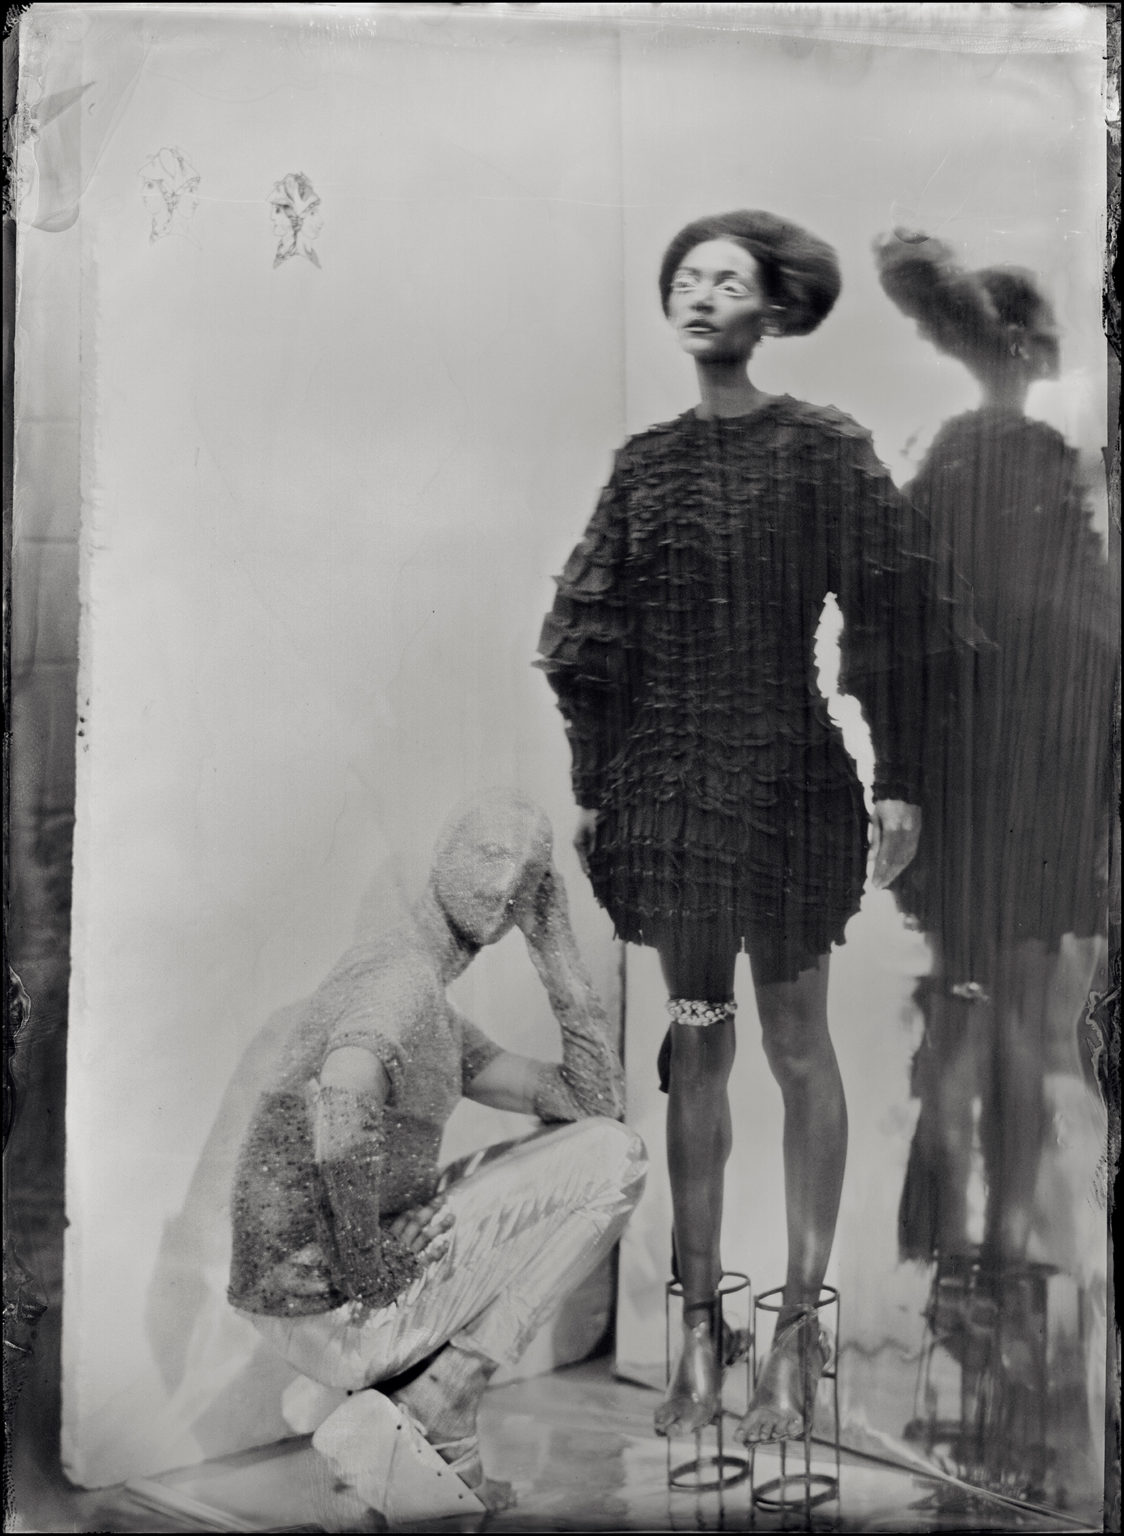 M. de Nood Revisits Historical Photography With FW21 Photoshoot - V ...